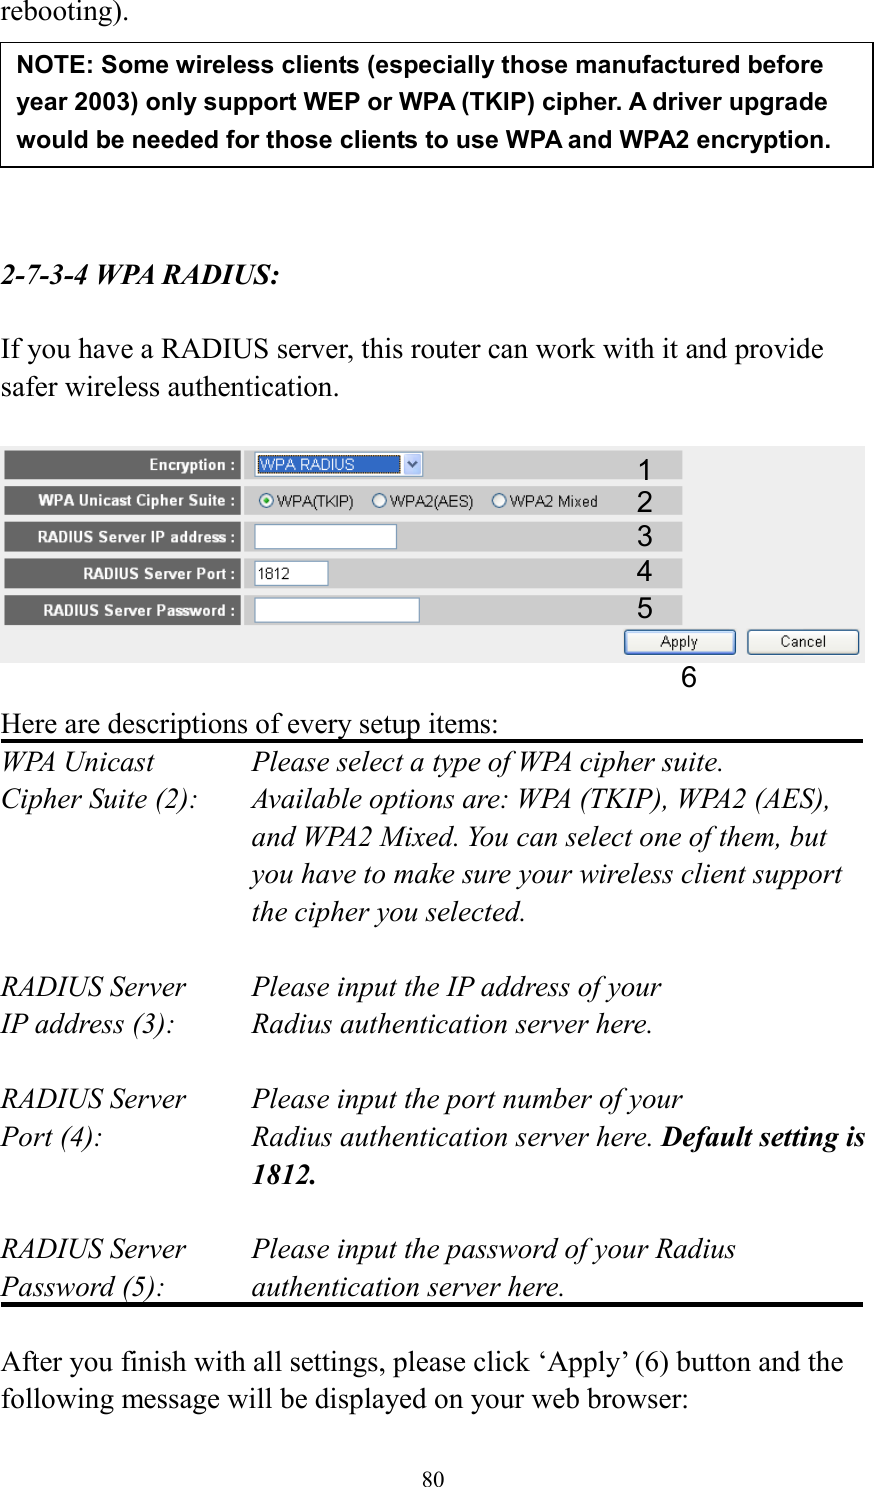 80 rebooting).       2-7-3-4 WPA RADIUS:  If you have a RADIUS server, this router can work with it and provide safer wireless authentication.    Here are descriptions of every setup items: WPA Unicast      Please select a type of WPA cipher suite. Cipher Suite (2):  Available options are: WPA (TKIP), WPA2 (AES), and WPA2 Mixed. You can select one of them, but you have to make sure your wireless client support the cipher you selected.  RADIUS Server     Please input the IP address of your IP address (3):      Radius authentication server here.  RADIUS Server     Please input the port number of your Port (4):    Radius authentication server here. Default setting is 1812.  RADIUS Server     Please input the password of your Radius Password (5):    authentication server here.  After you finish with all settings, please click ‘Apply’ (6) button and the following message will be displayed on your web browser: NOTE: Some wireless clients (especially those manufactured before year 2003) only support WEP or WPA (TKIP) cipher. A driver upgrade would be needed for those clients to use WPA and WPA2 encryption. 1 3 4 2 5 6 